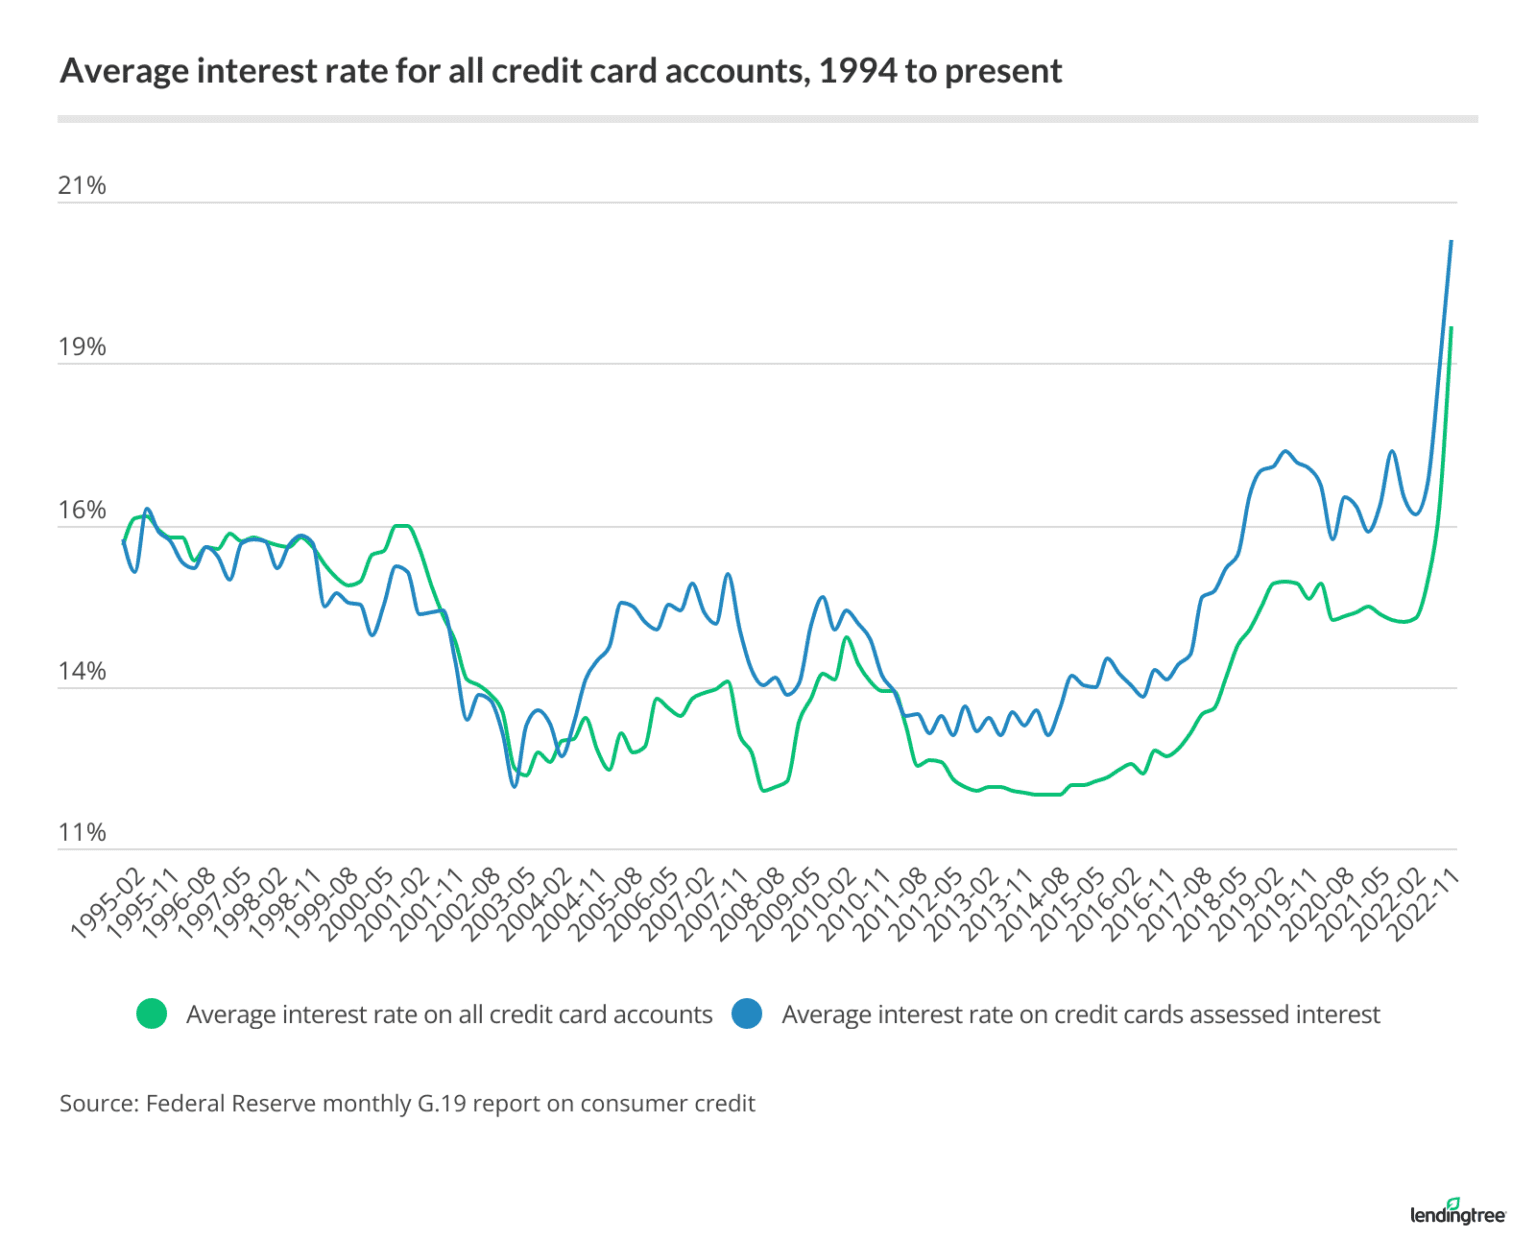 Average Credit Card Interest Rate in America Today